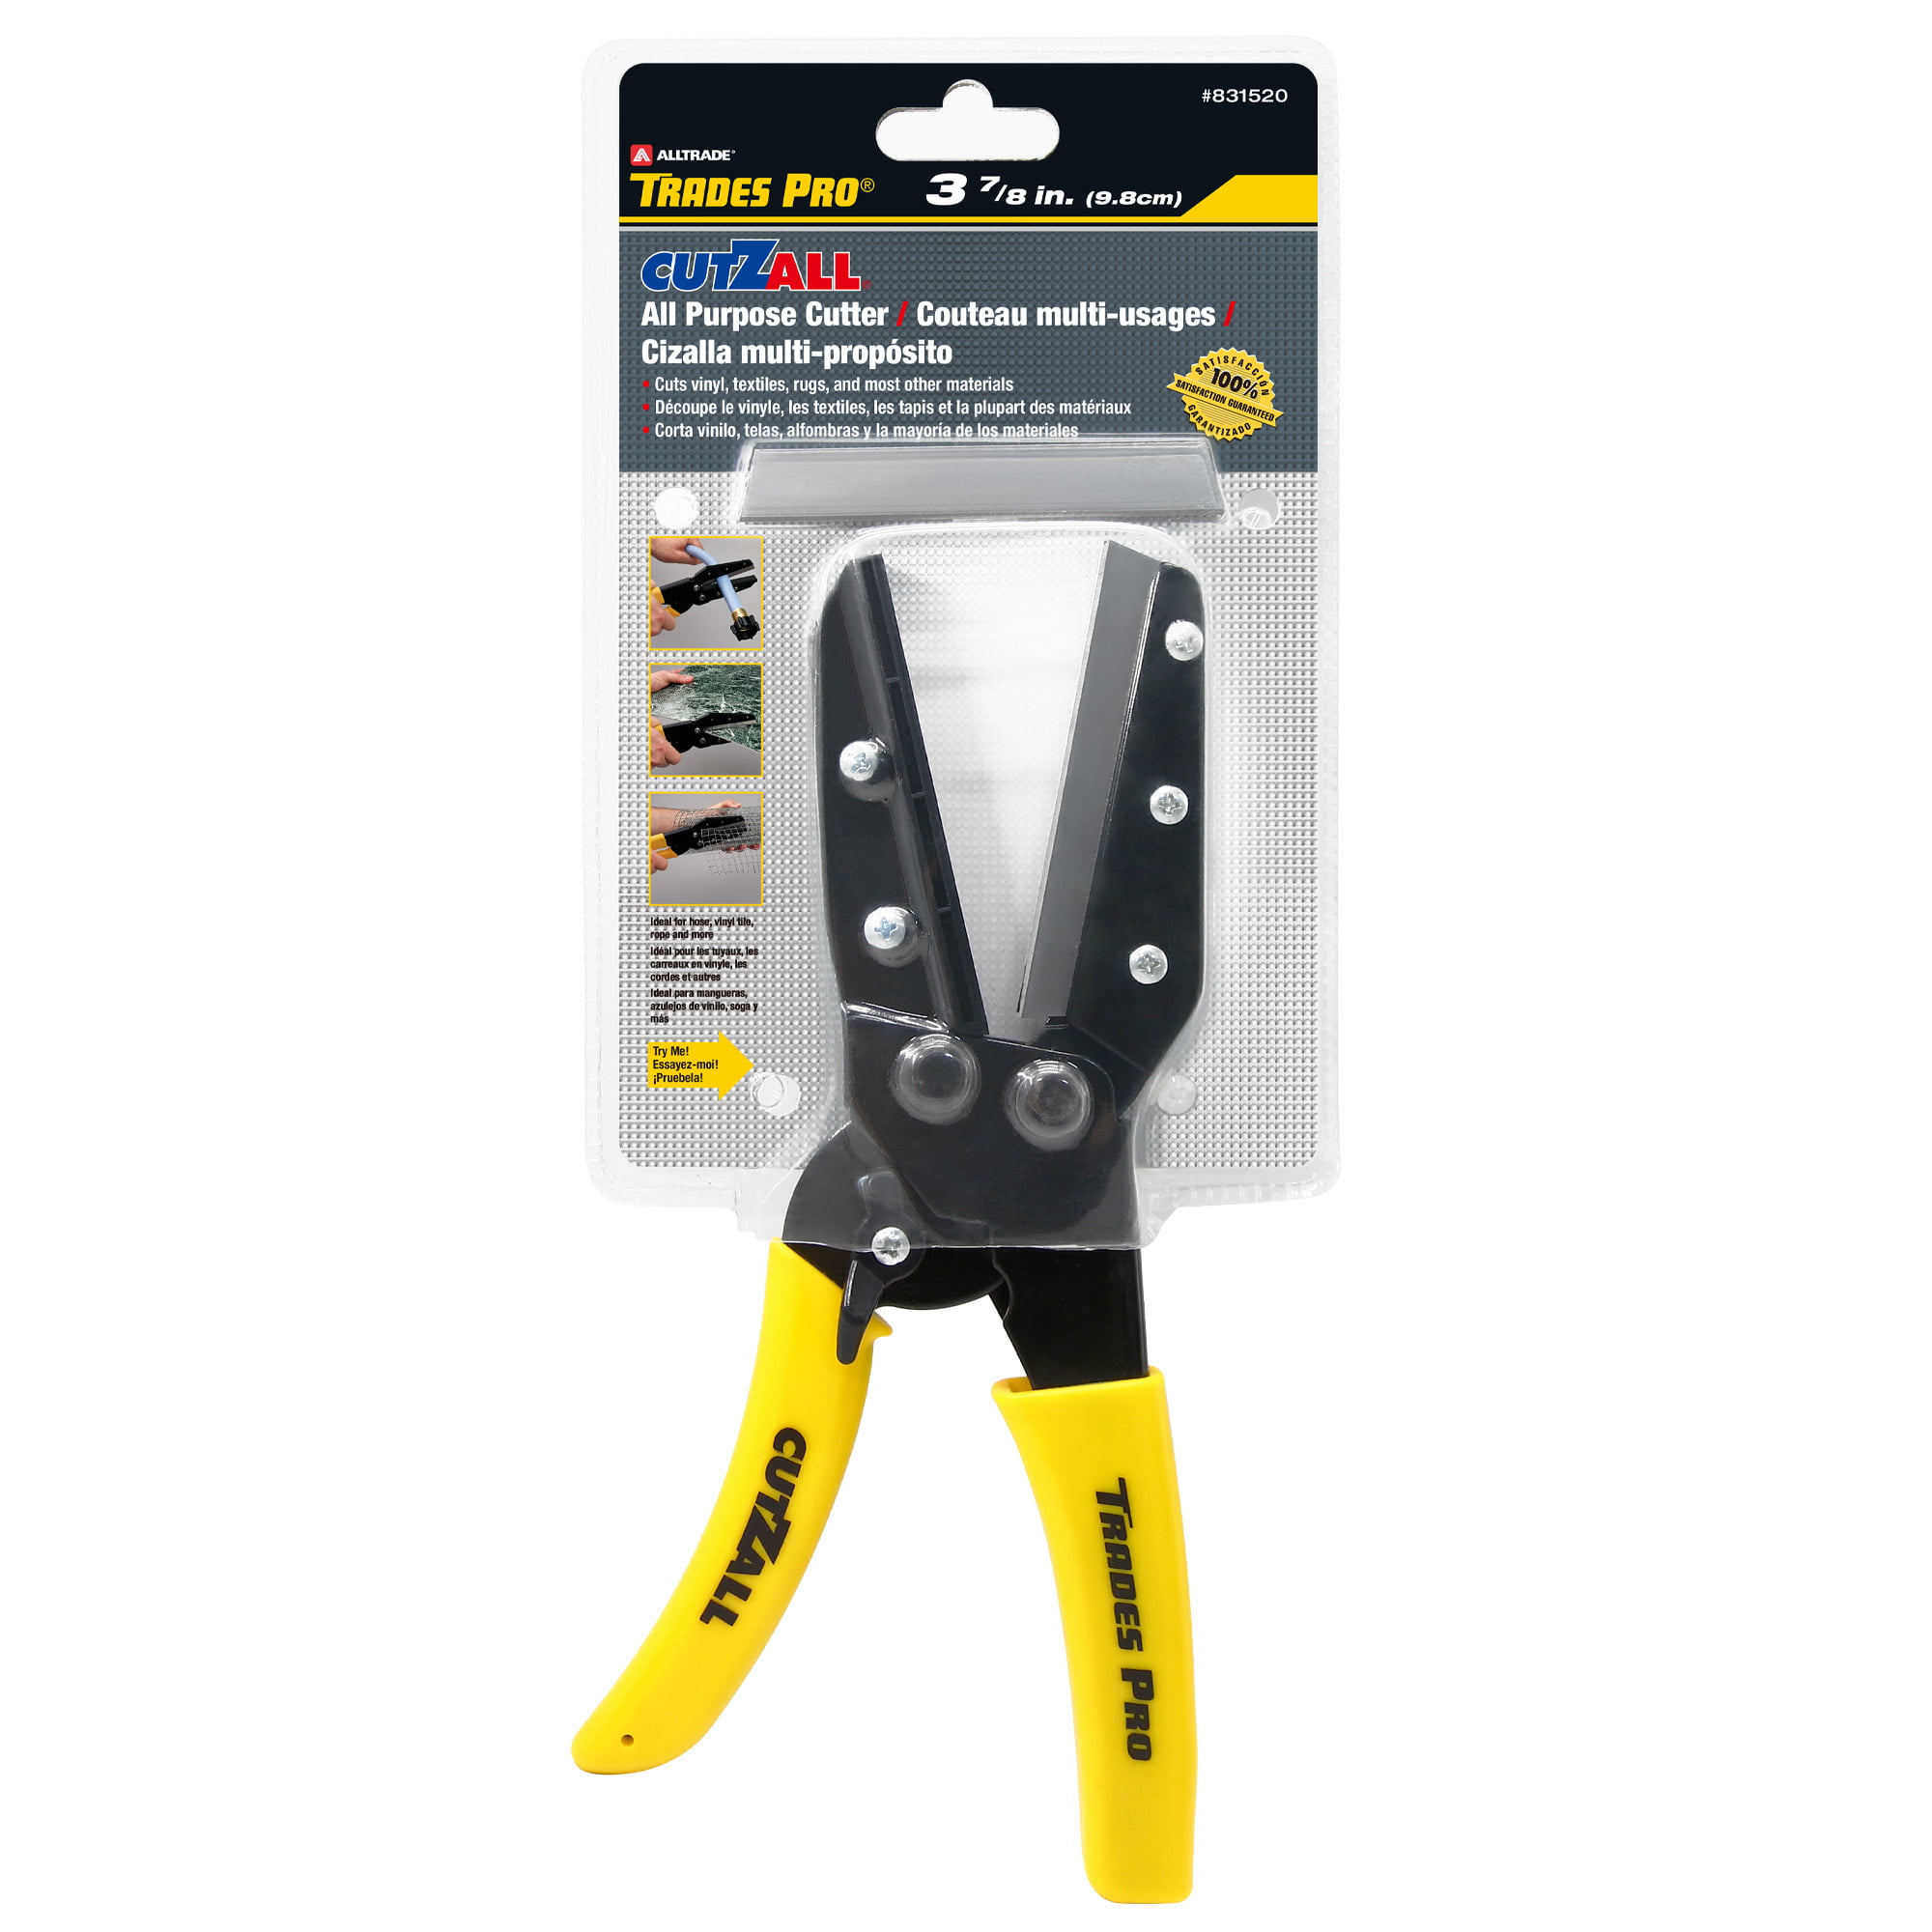 Tradespro 3-7/8 Inch Cutzall® All Purpose Cutter, Multipurpose, Razor Sharp  for Hose, Metal, Fence, Rope - 831520